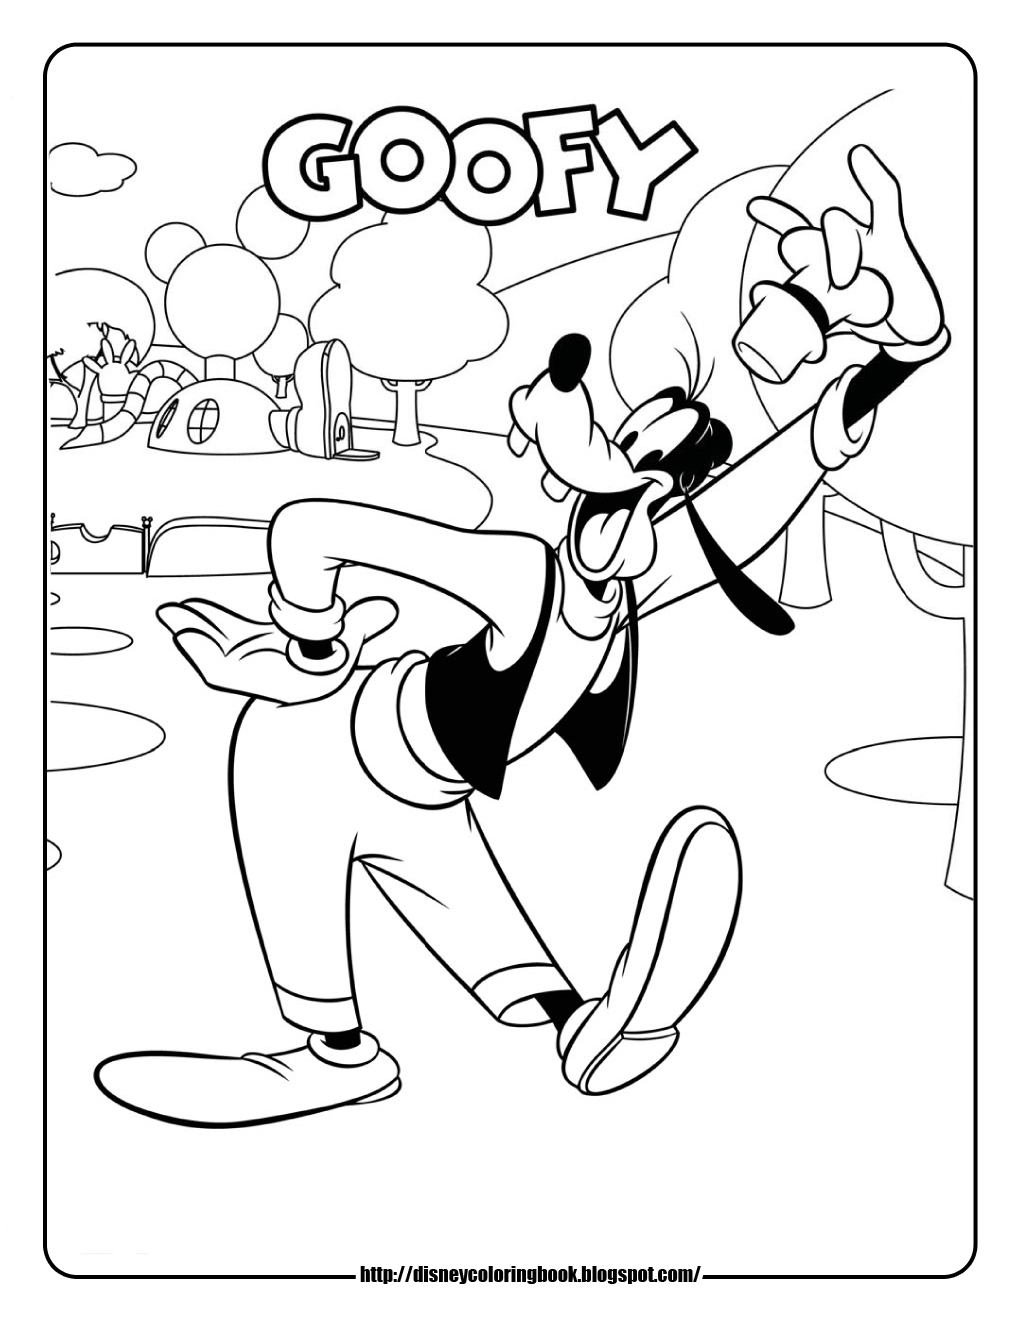 Disney Coloring Pages and Sheets for Kids: Mickey Mouse  